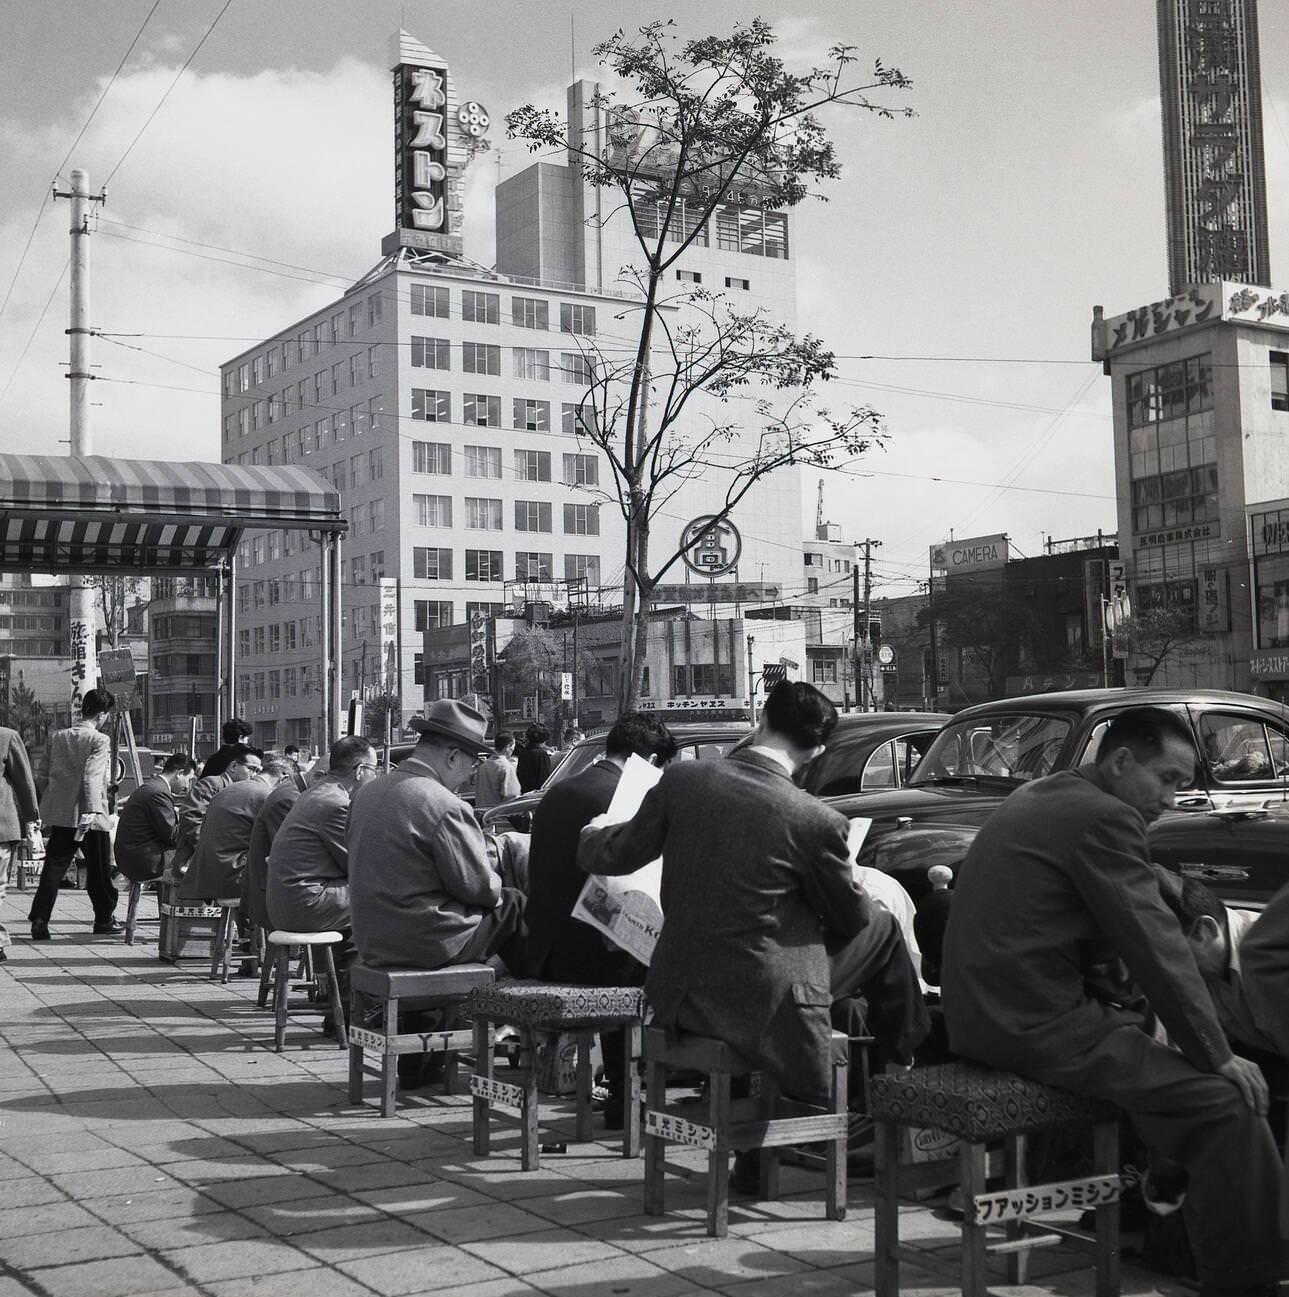 A row of shoe shining stands outside, 1950s.